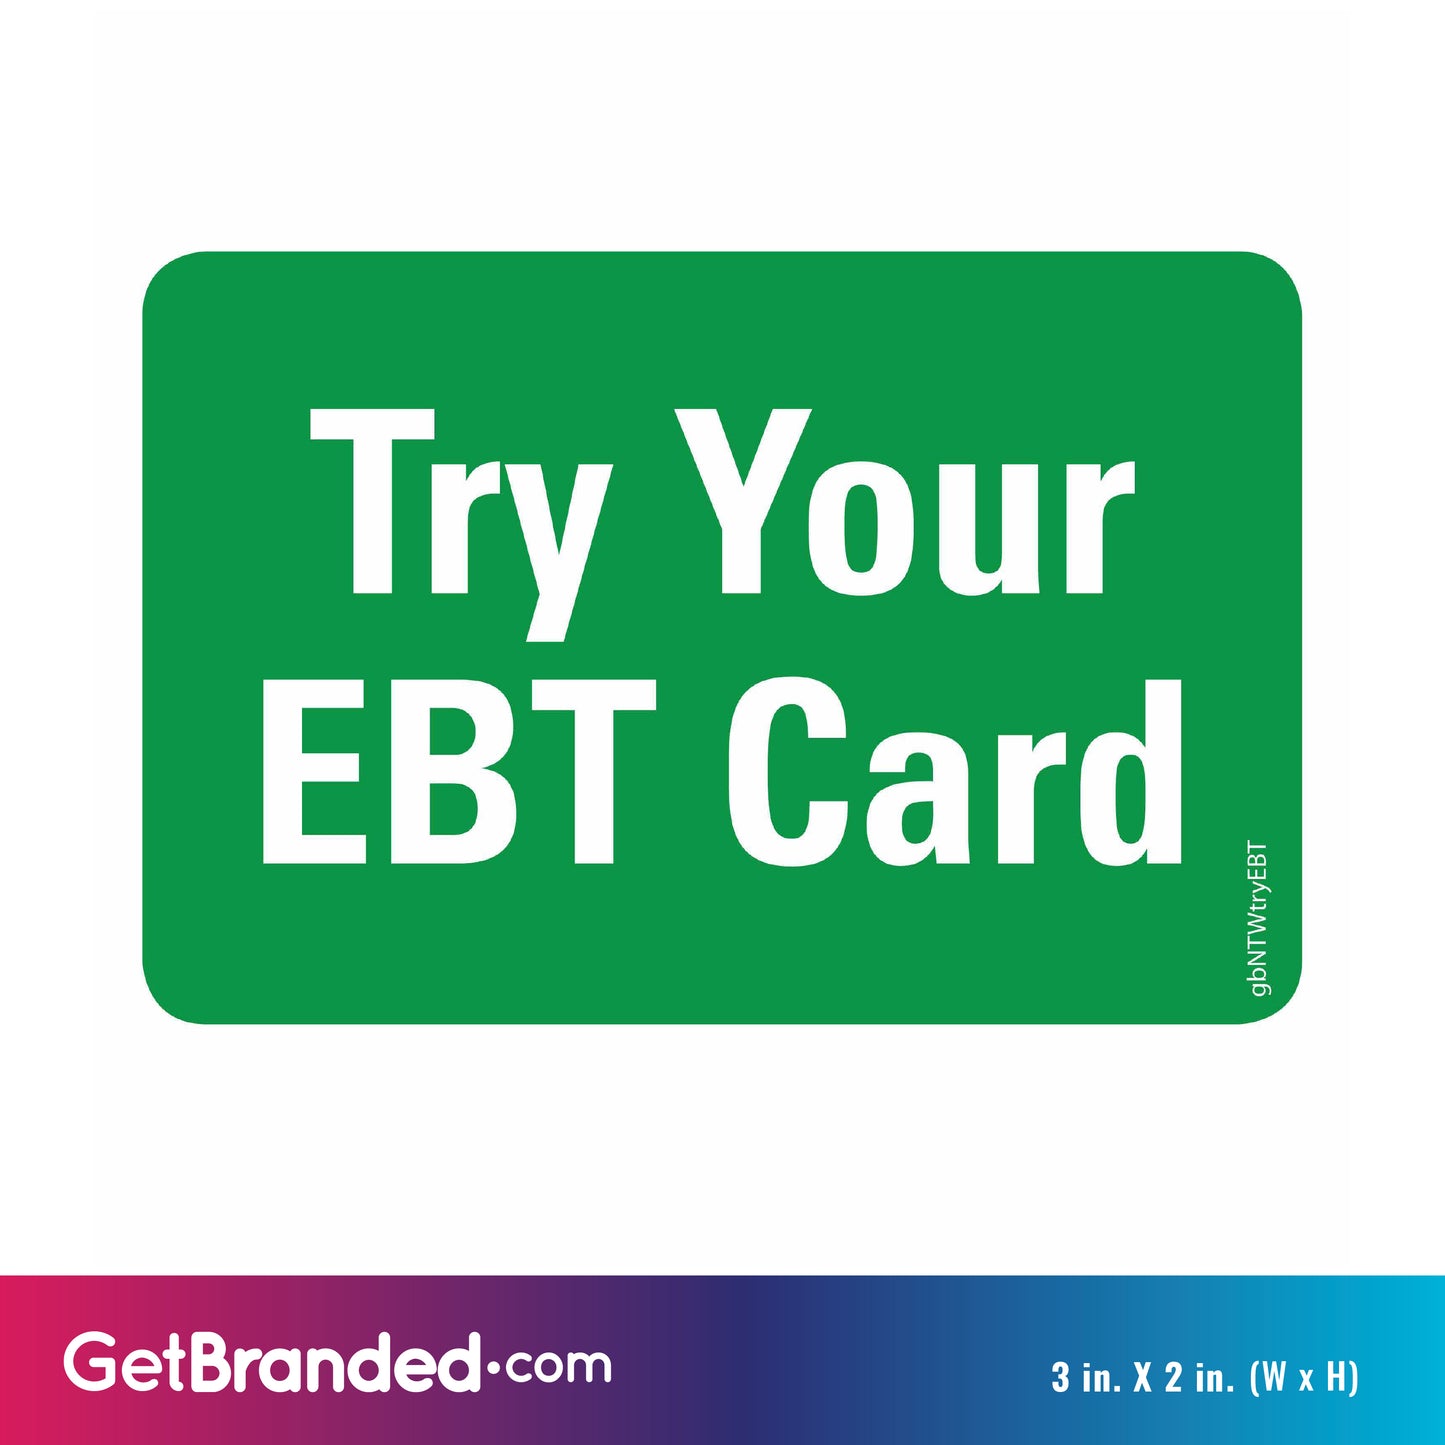 Try Your EBT Card Decal size guide.